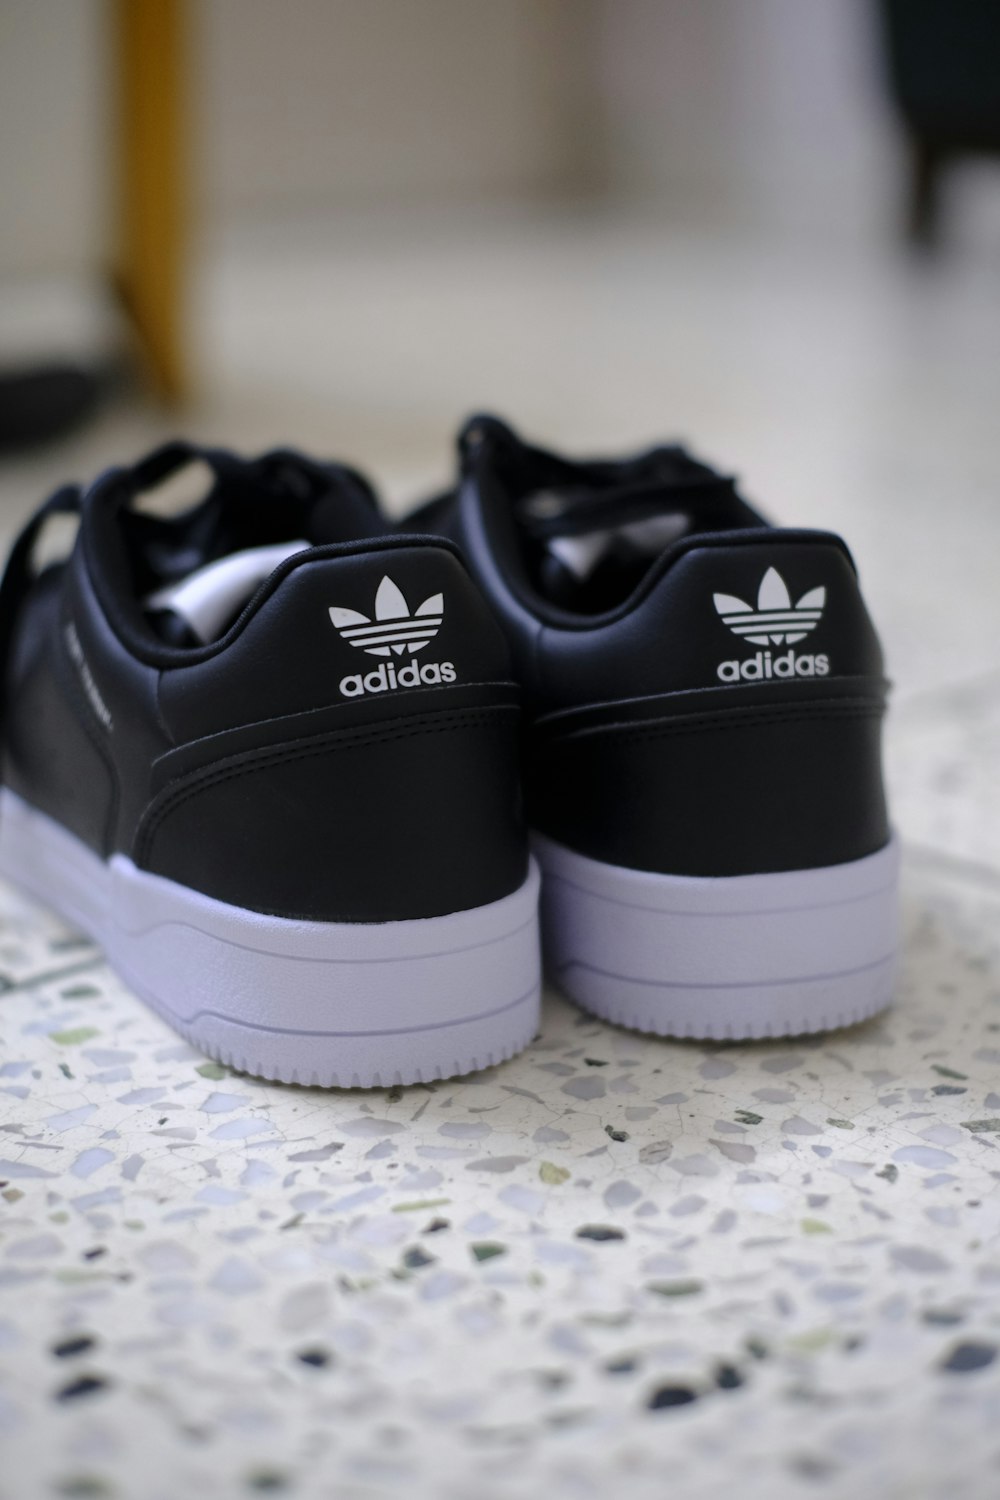 a pair of black and white adidas sneakers